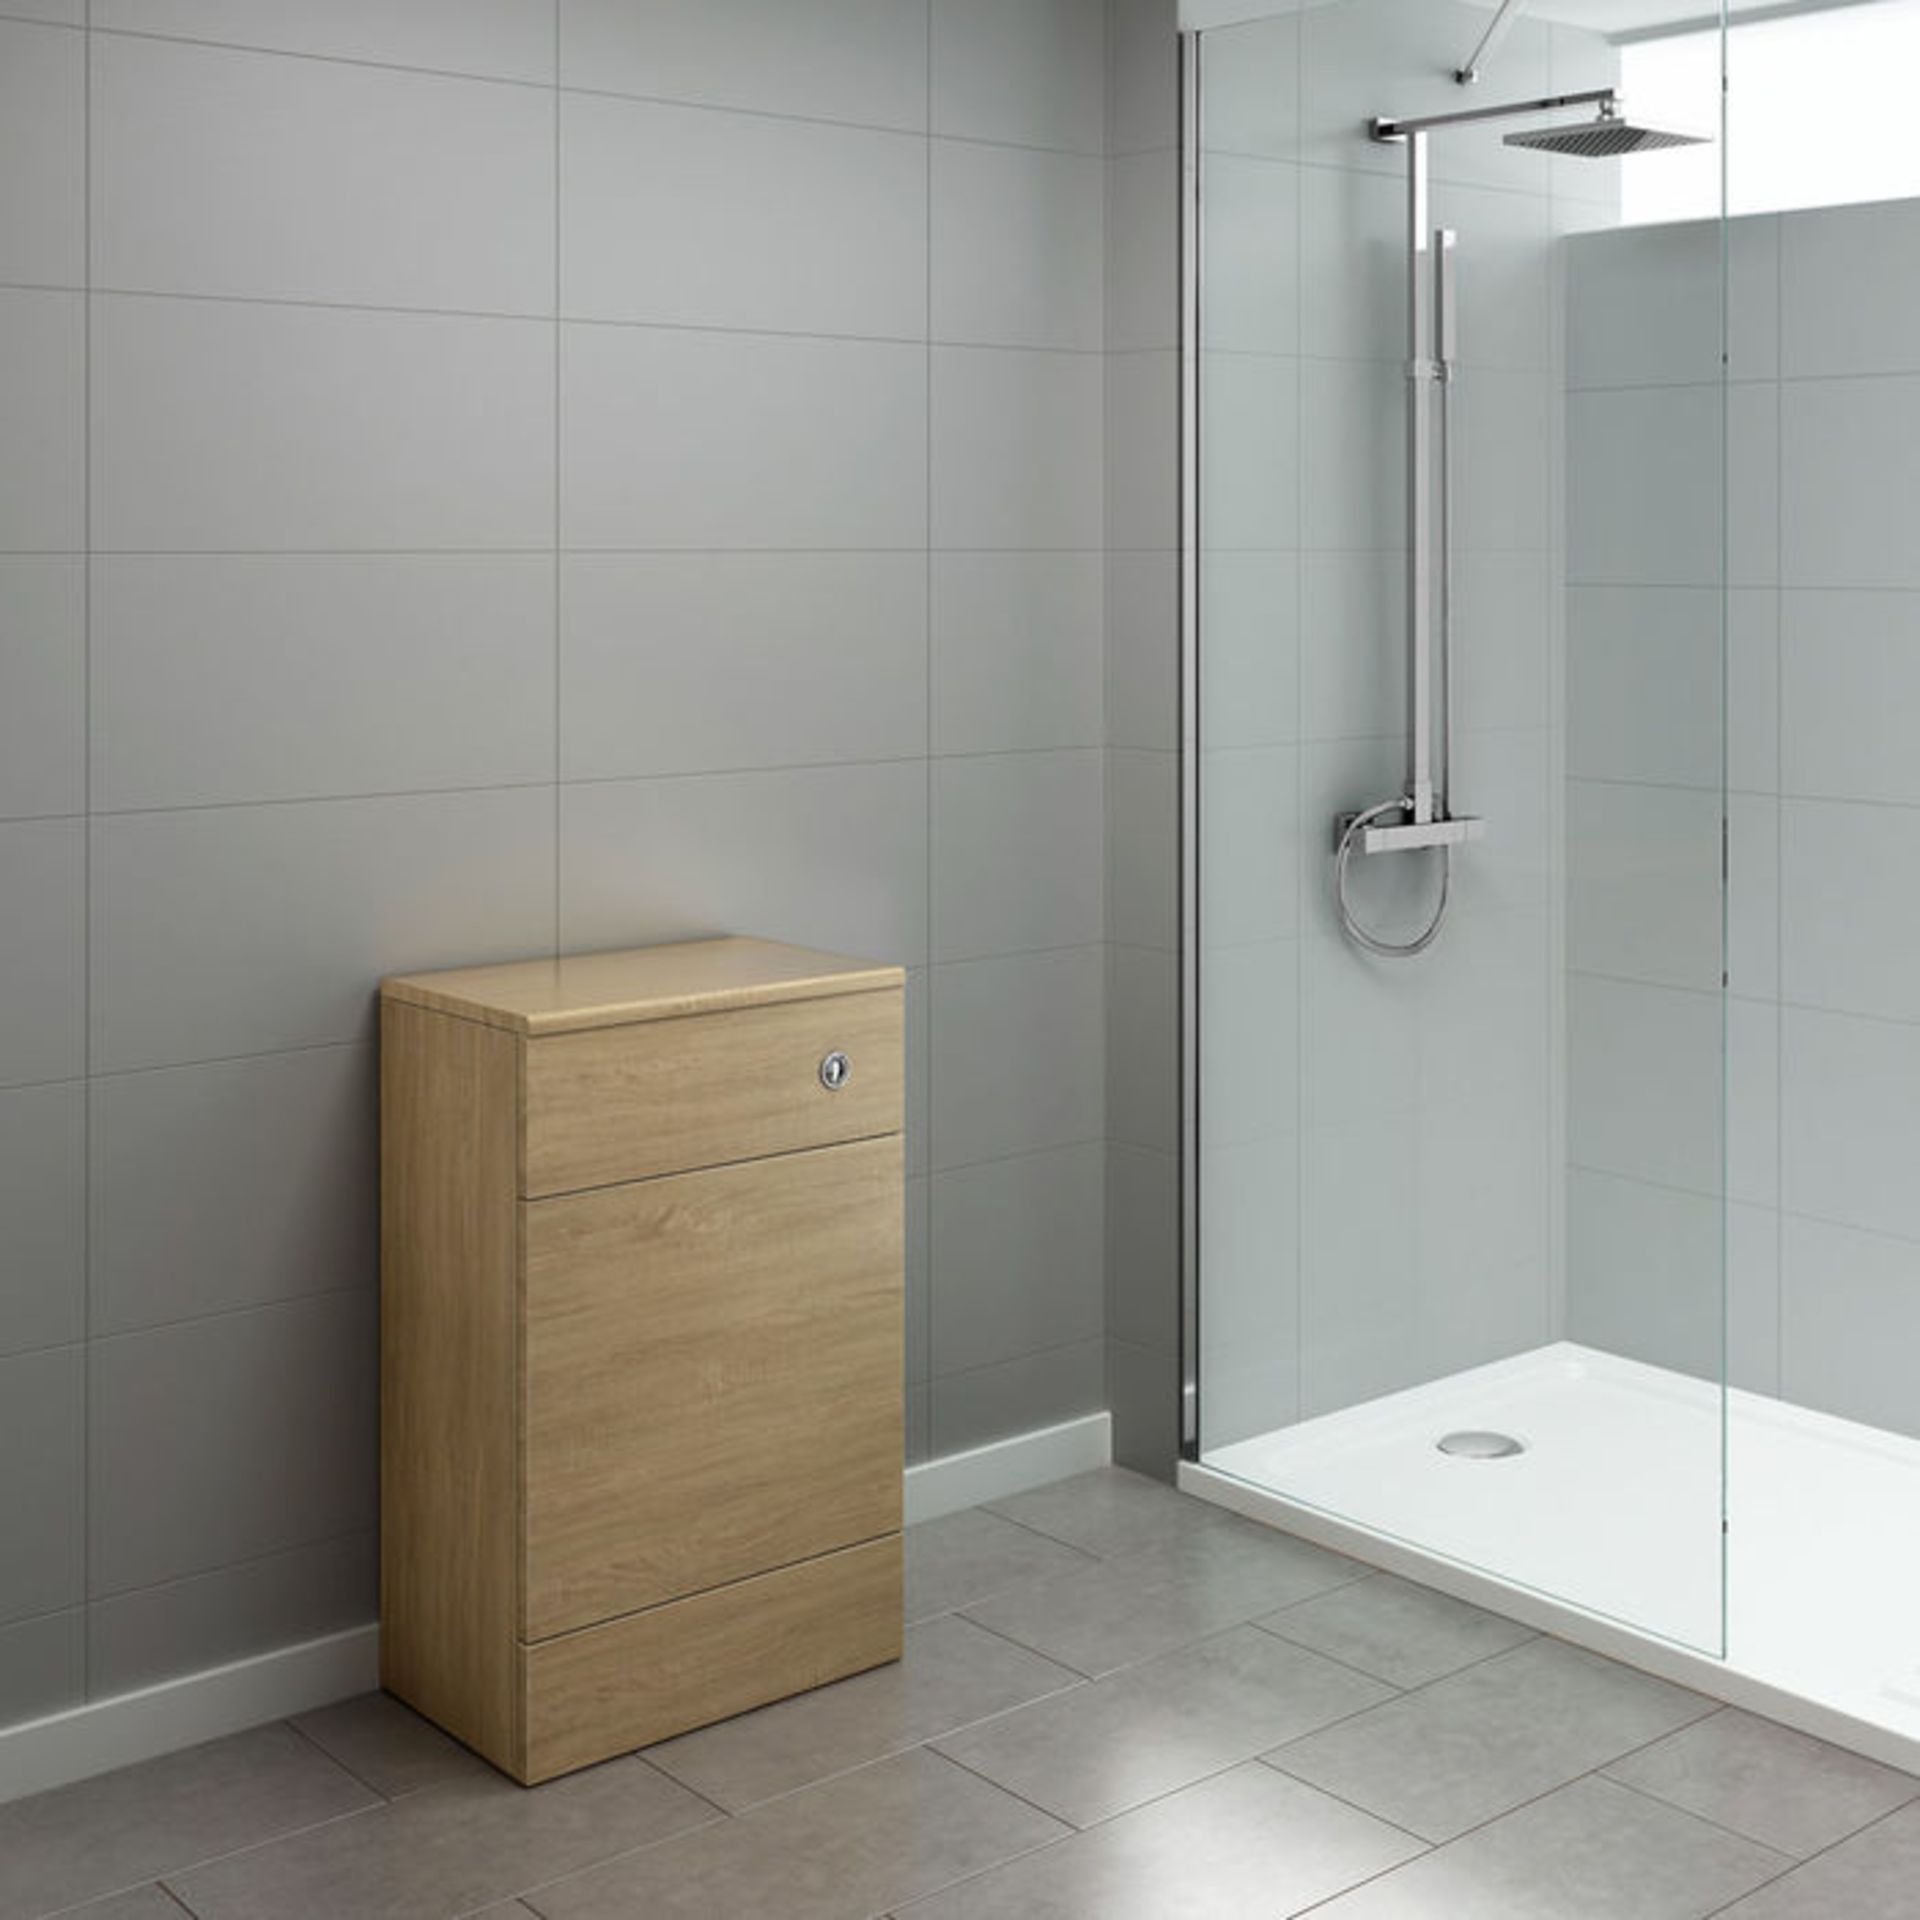 (CP35) 500mm Harper Oak Back To Wall Toilet Unit. RRP £199.99.Our discretion cleverly houses a... - Image 2 of 3